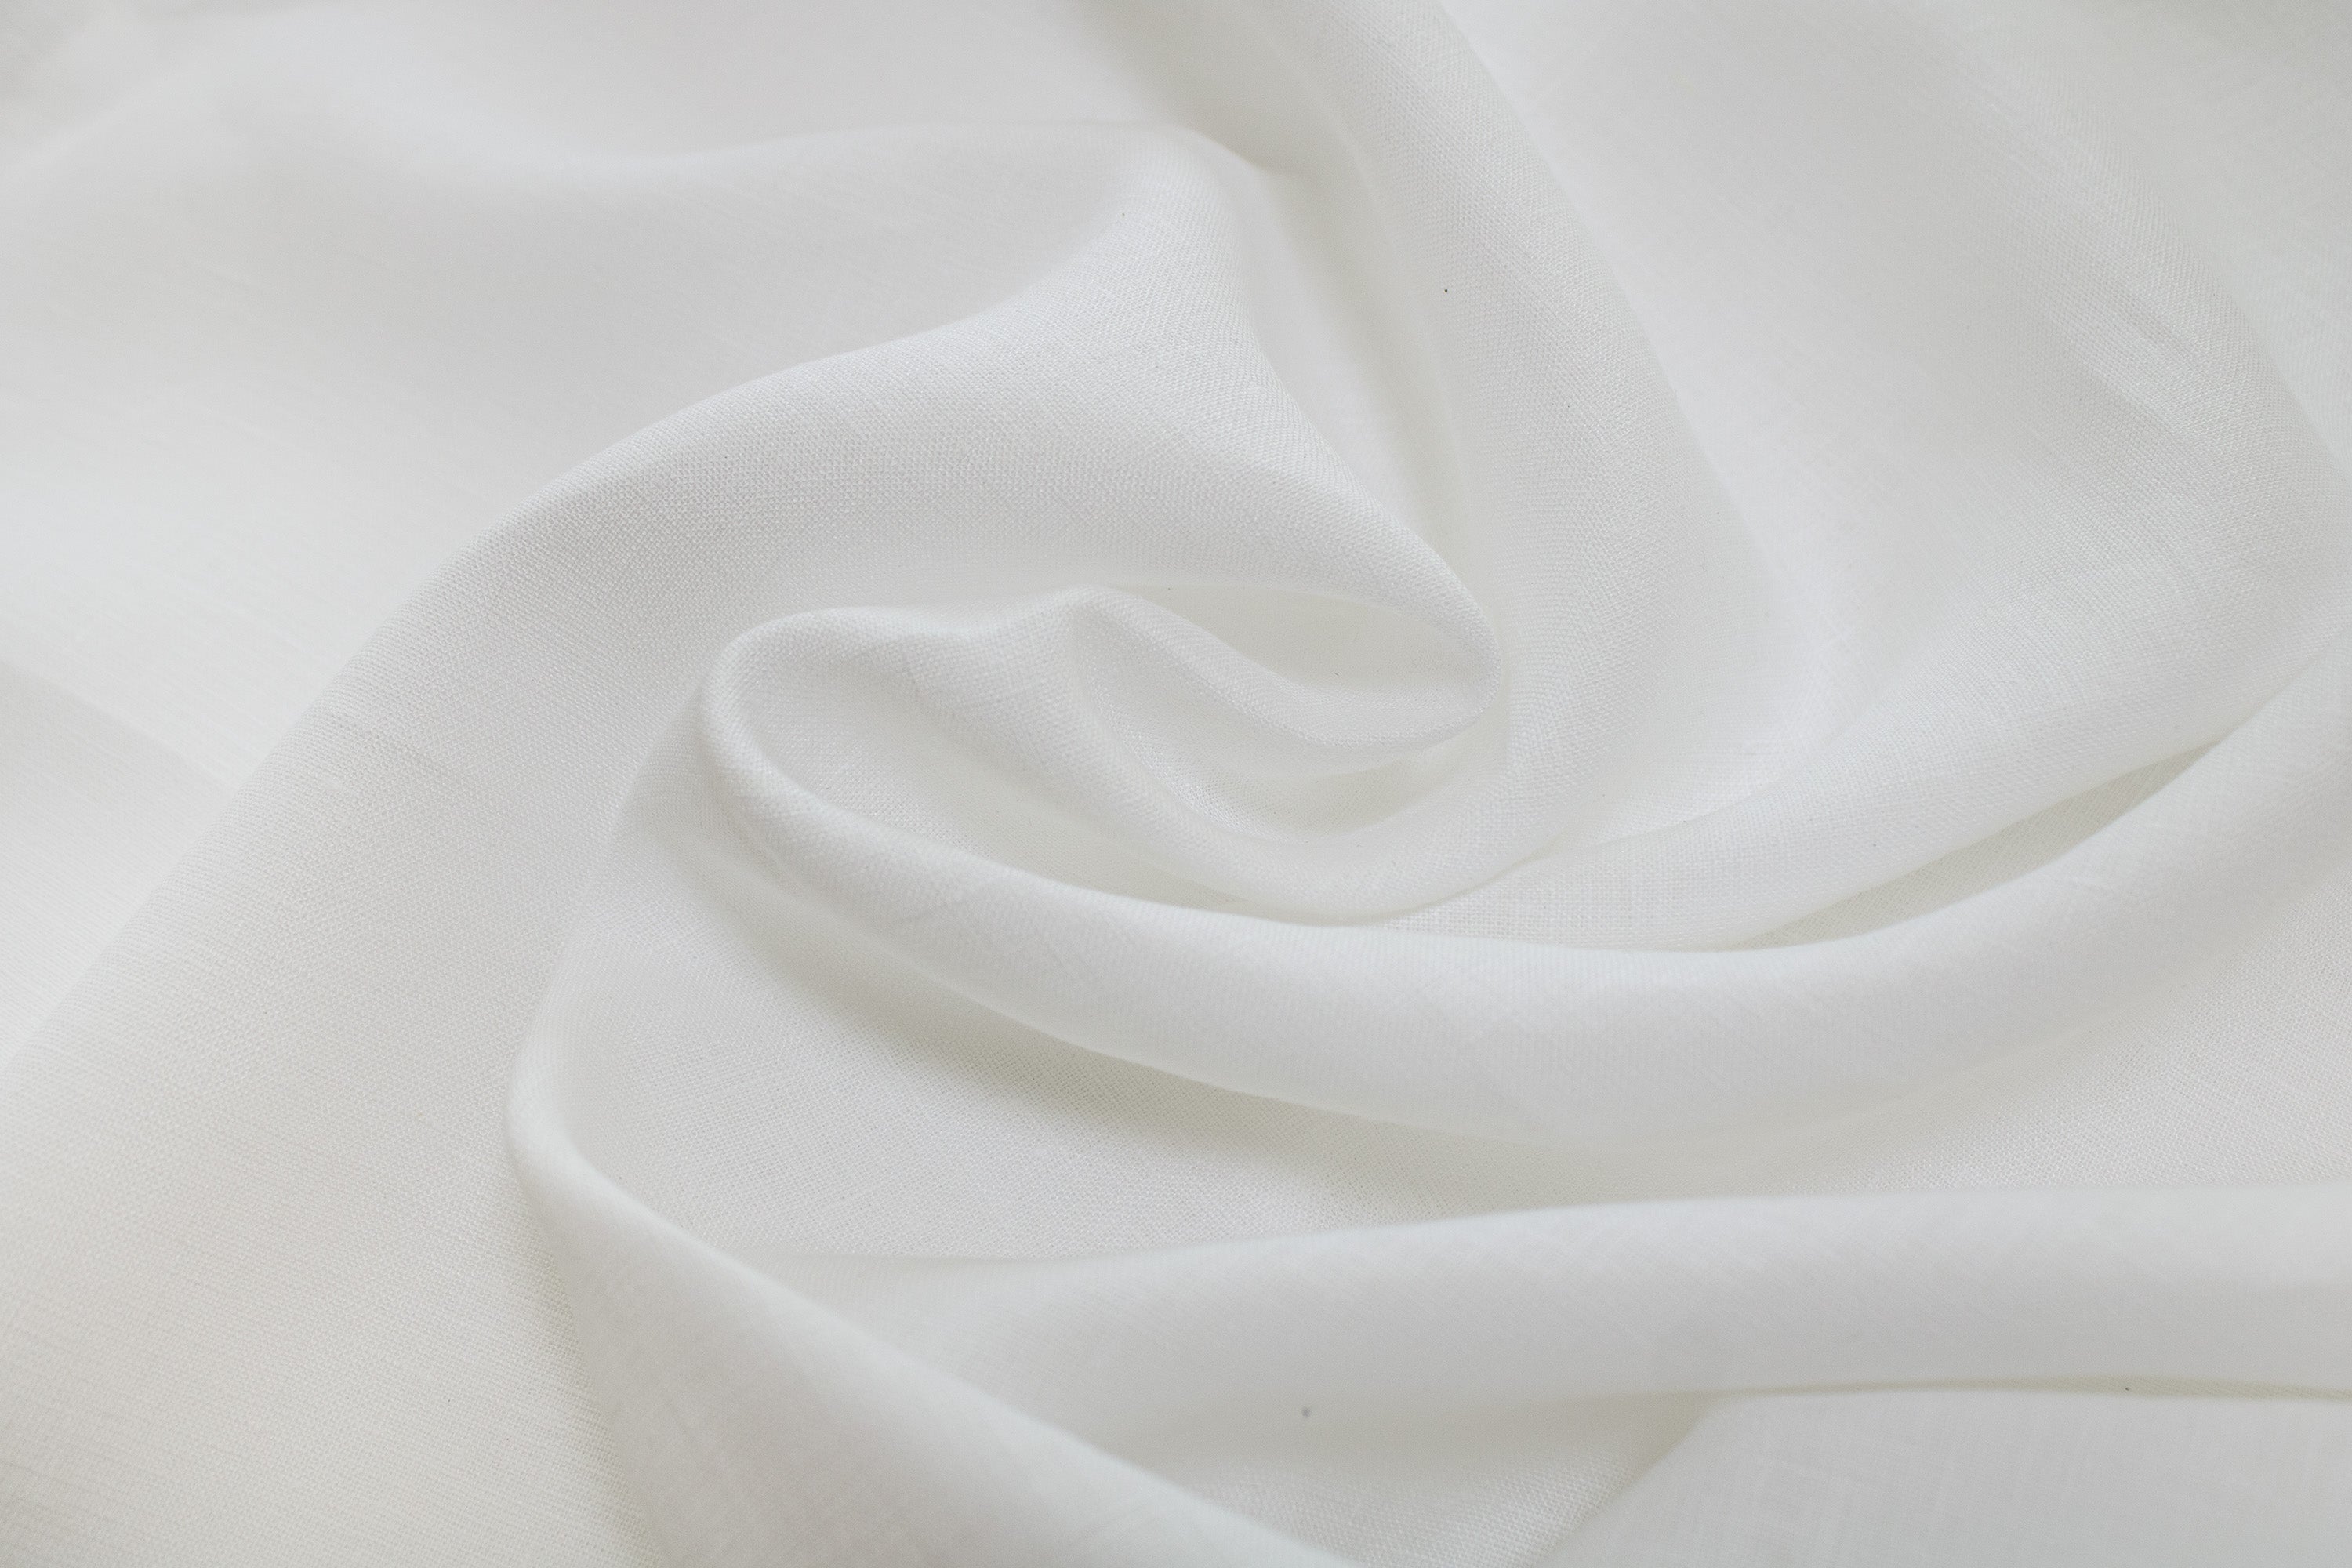 Luca-S Pure Natural 100% Linen Soft Fabric White Color